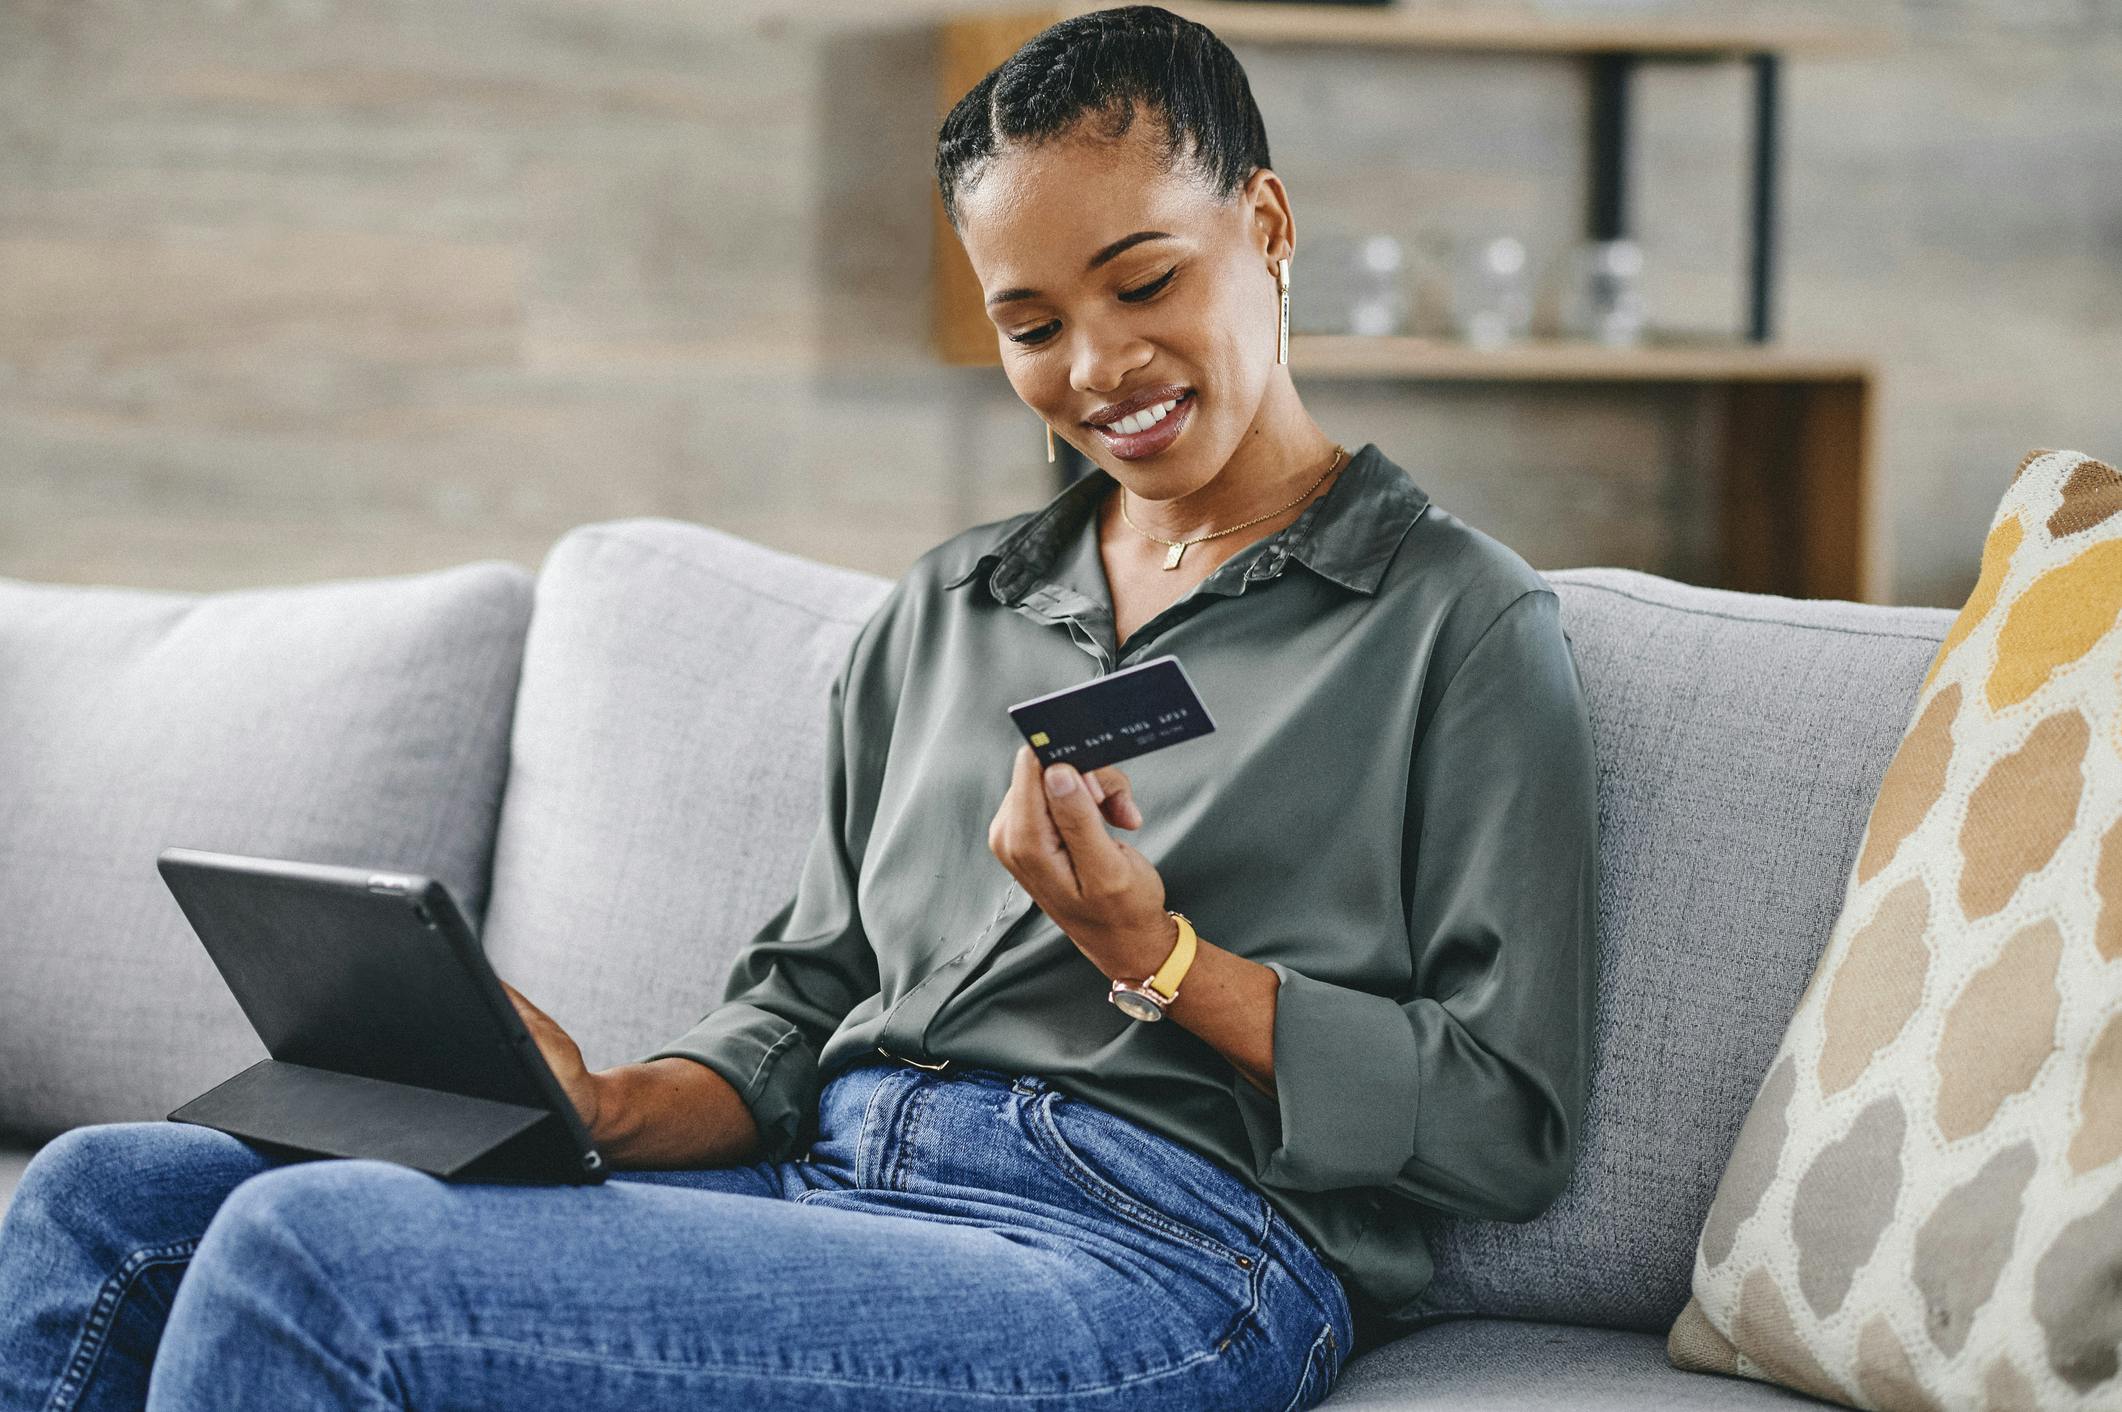 woman sitting on a couch using a laptop and holding a credit card